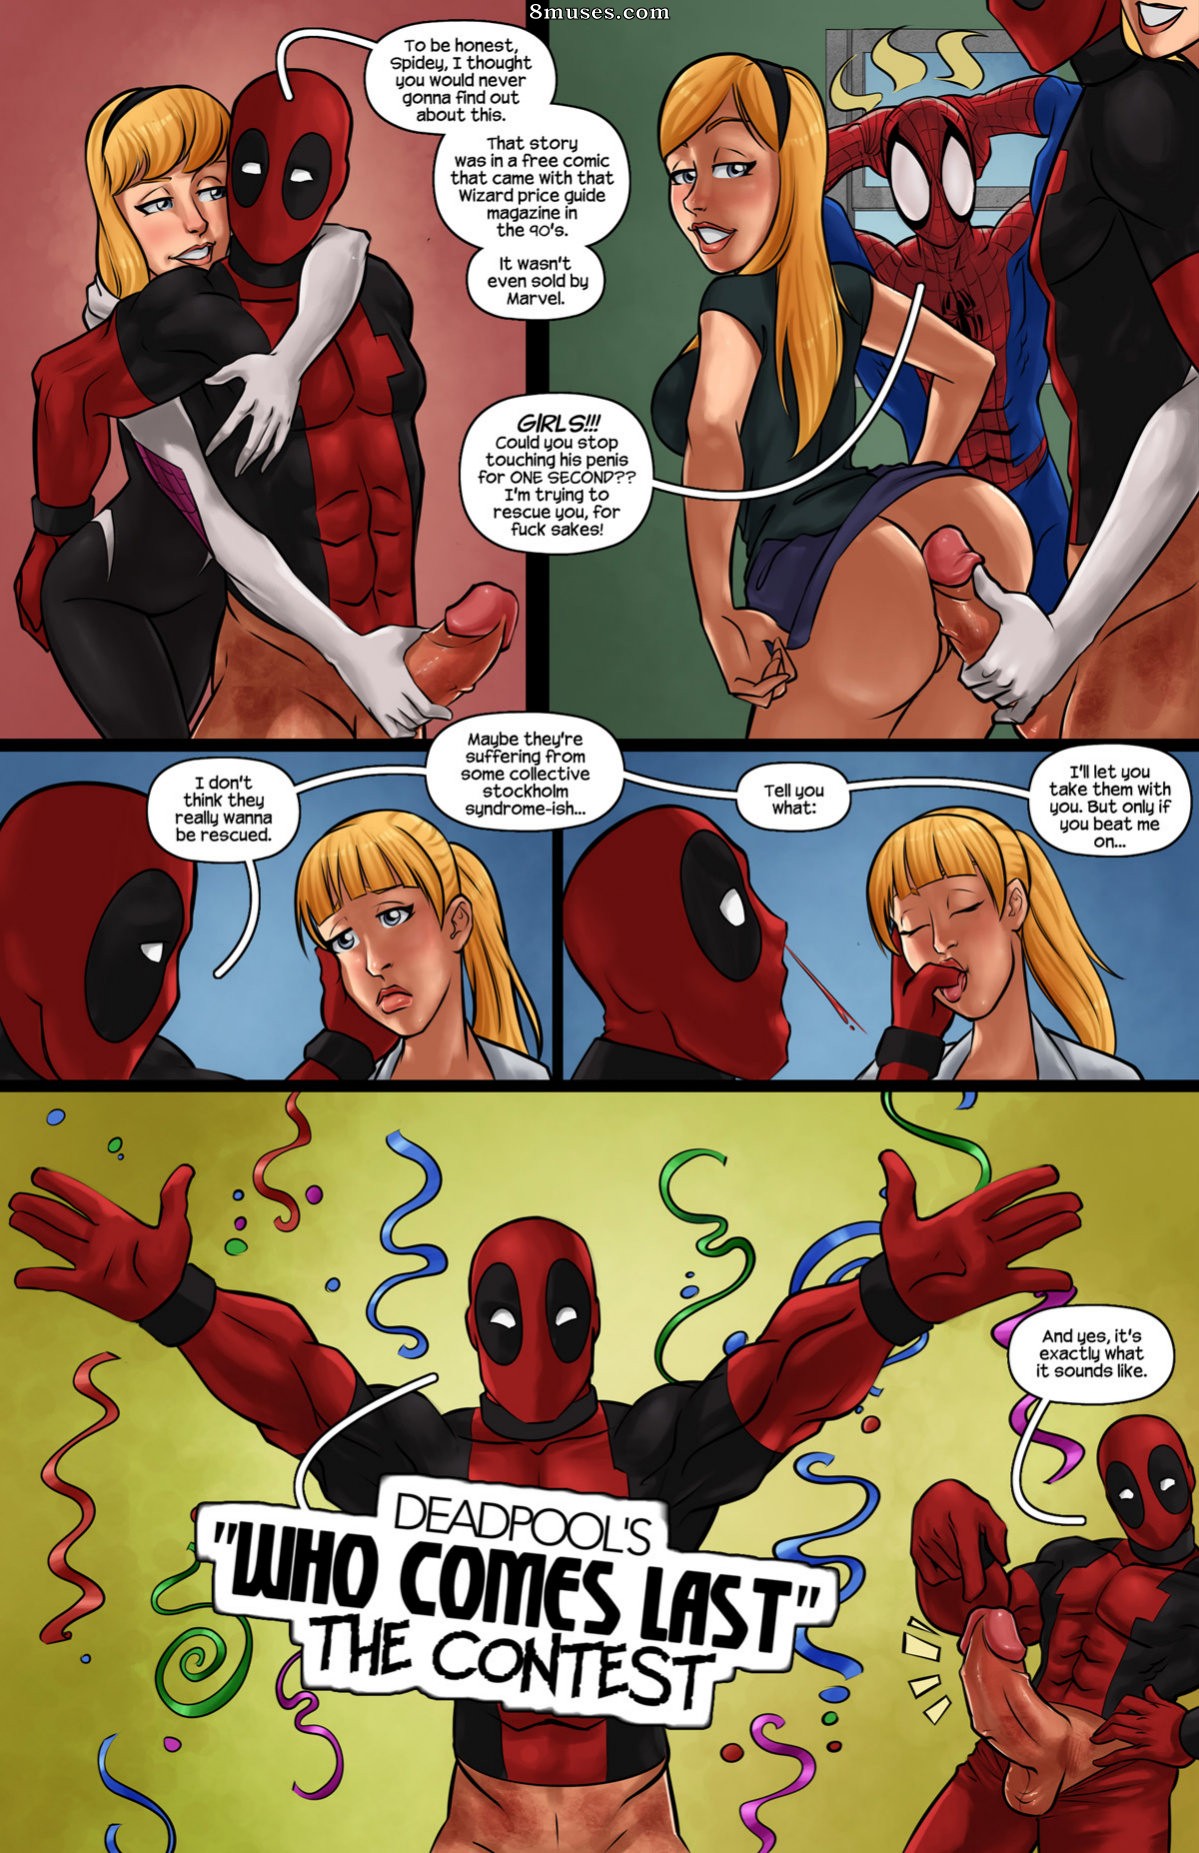 Deadpool Cartoon Porn - Gwen Stacies are the sole property of Deadpool Issue 1 - 8muses Comics - Sex  Comics and Porn Cartoons